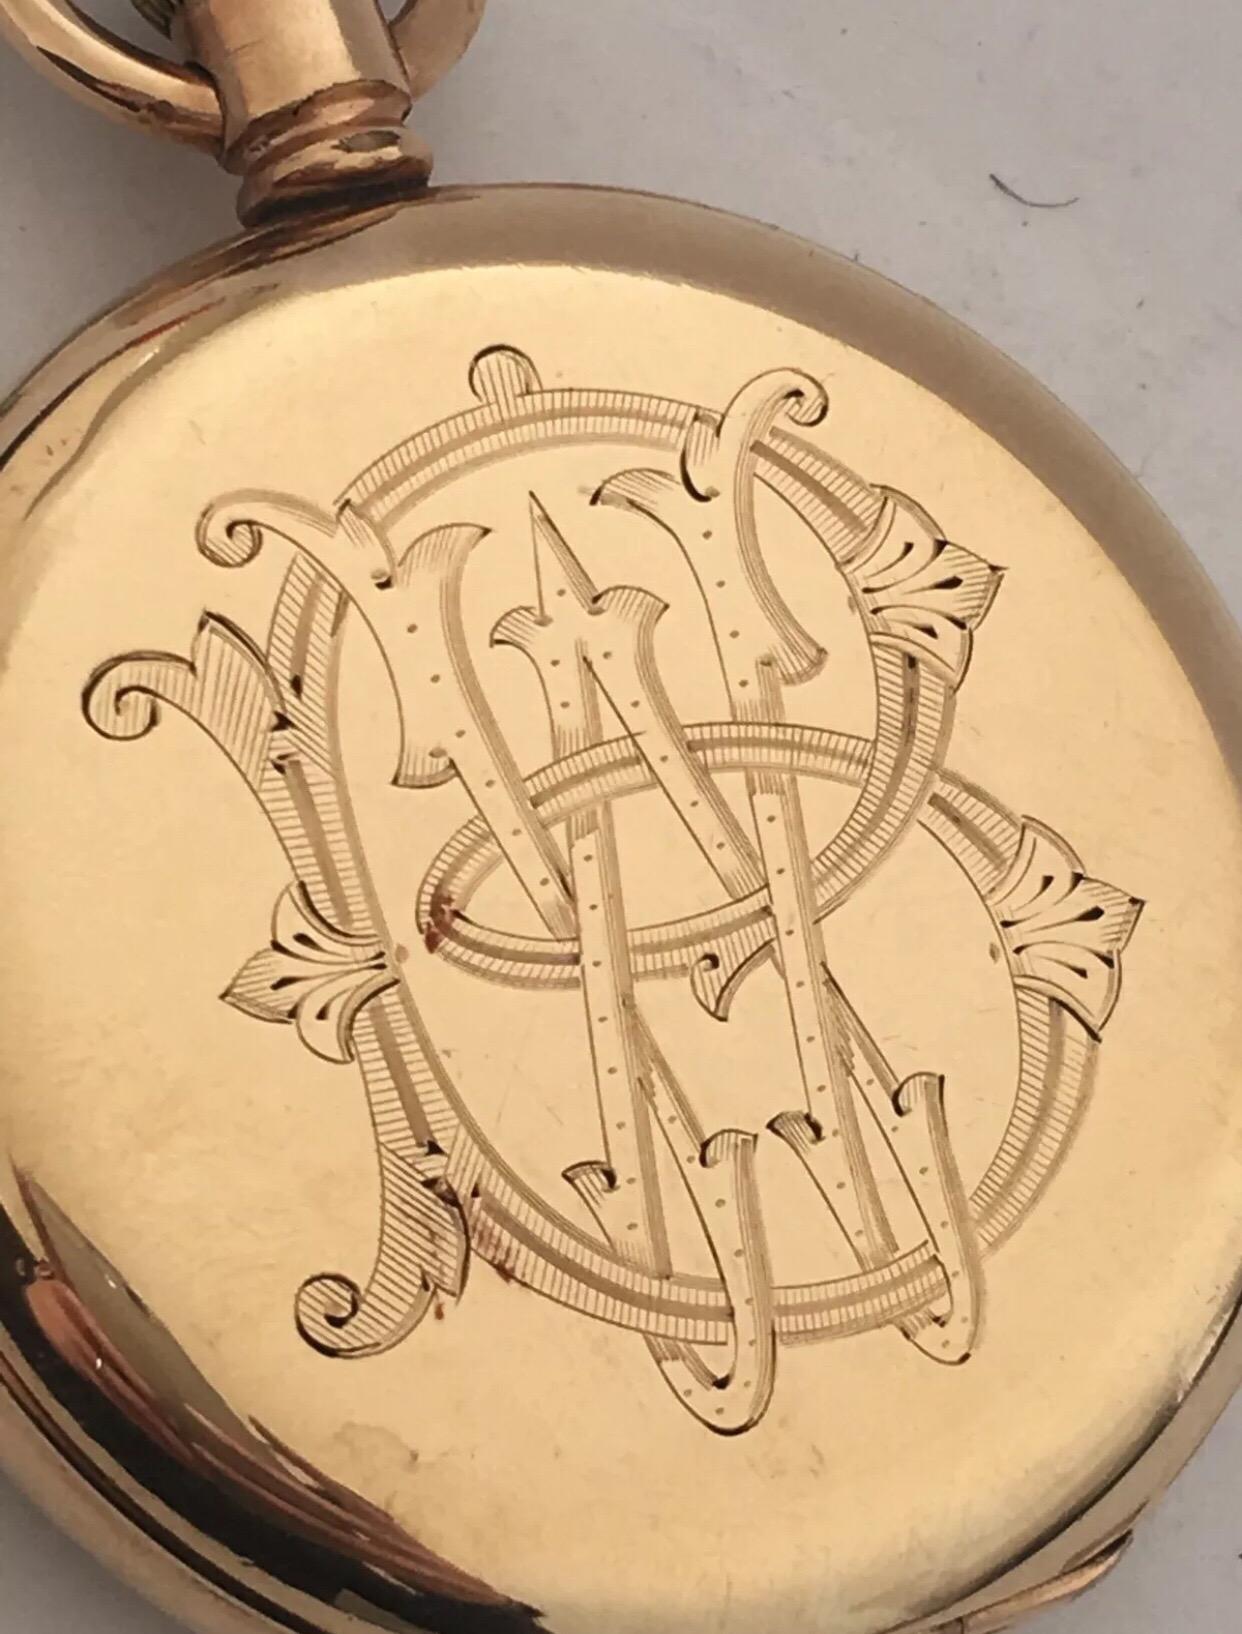 Antique Full Hunter Royal A.W.W. Co. Waltham, Mass Gold Plated Pocket Watch.
This beautiful watch is in good working condition and it is ticking well. It’s beautifully engraved emblem W.B. 